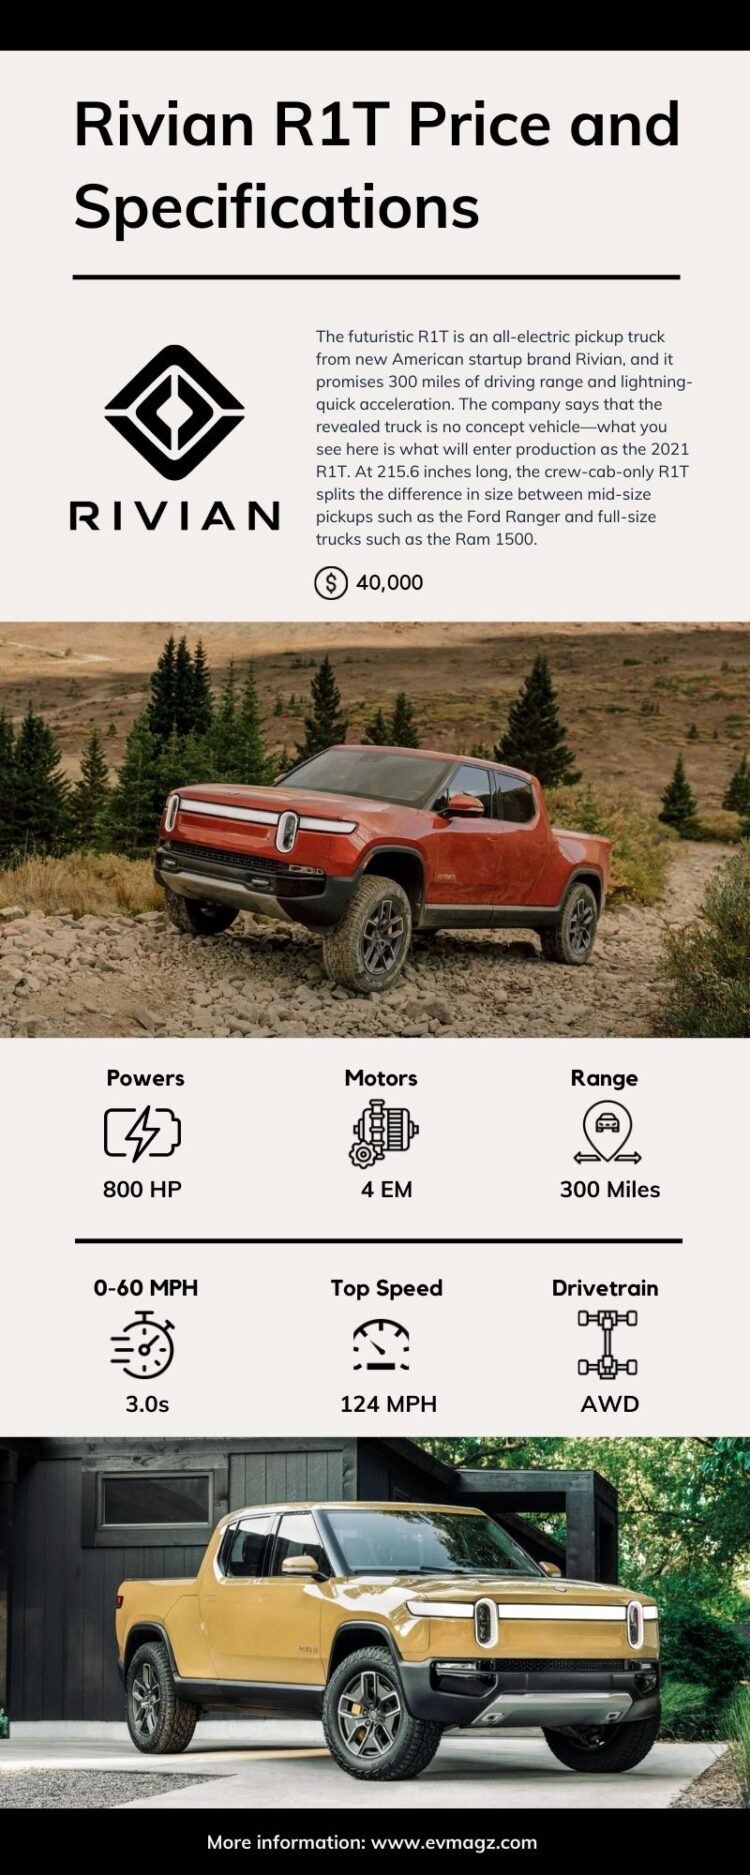 Rivian R1T Price and Specifications